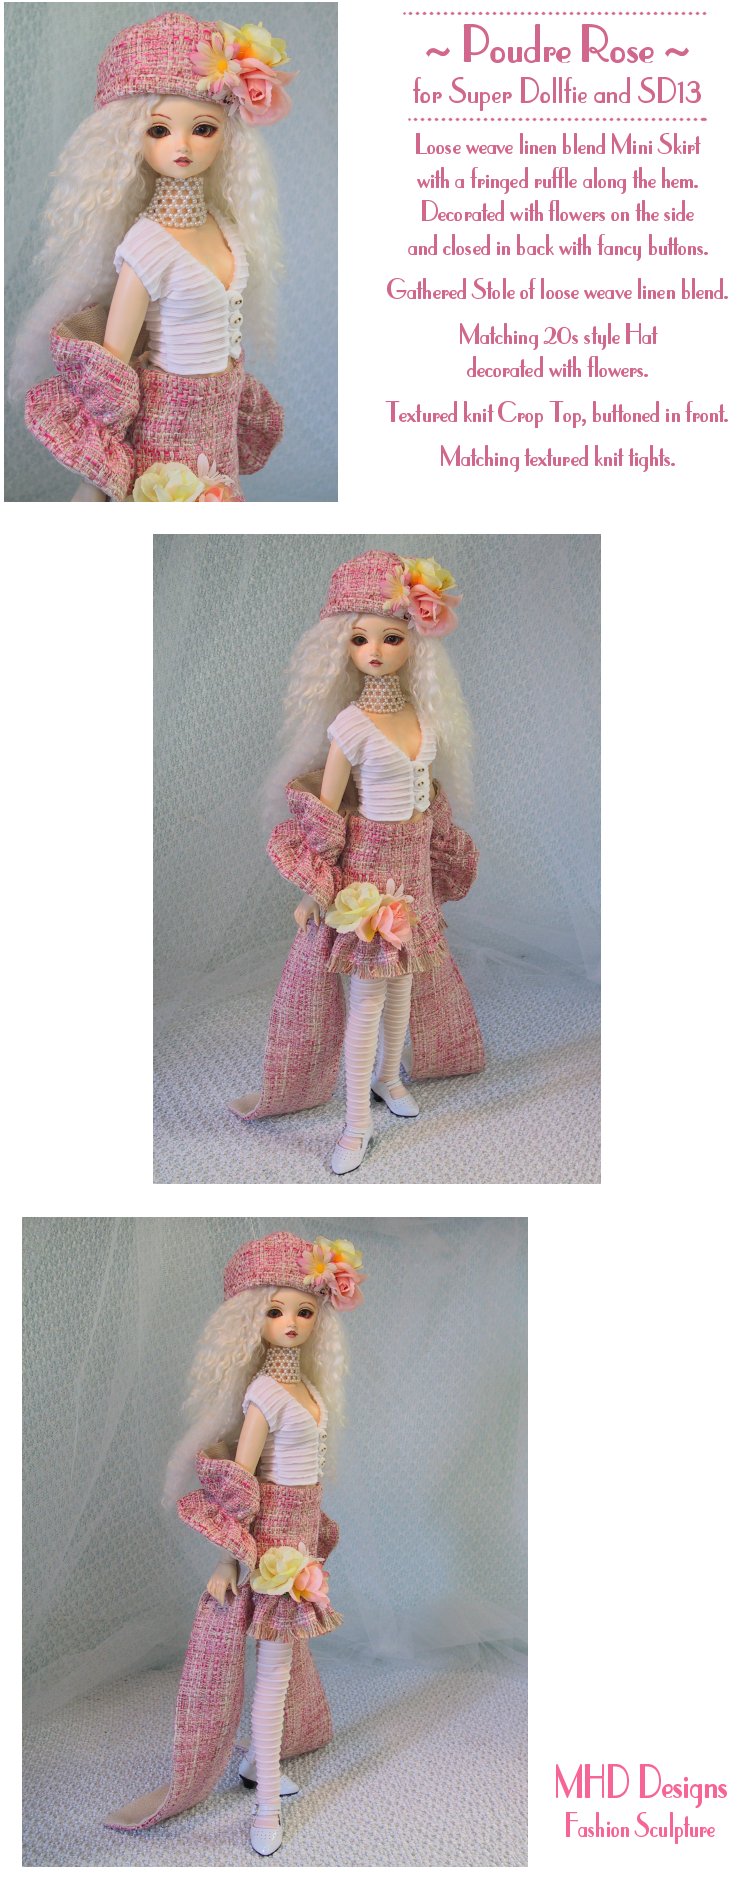 MHD Designs - 


Pink Powder - for Super Dollfie and SD13


